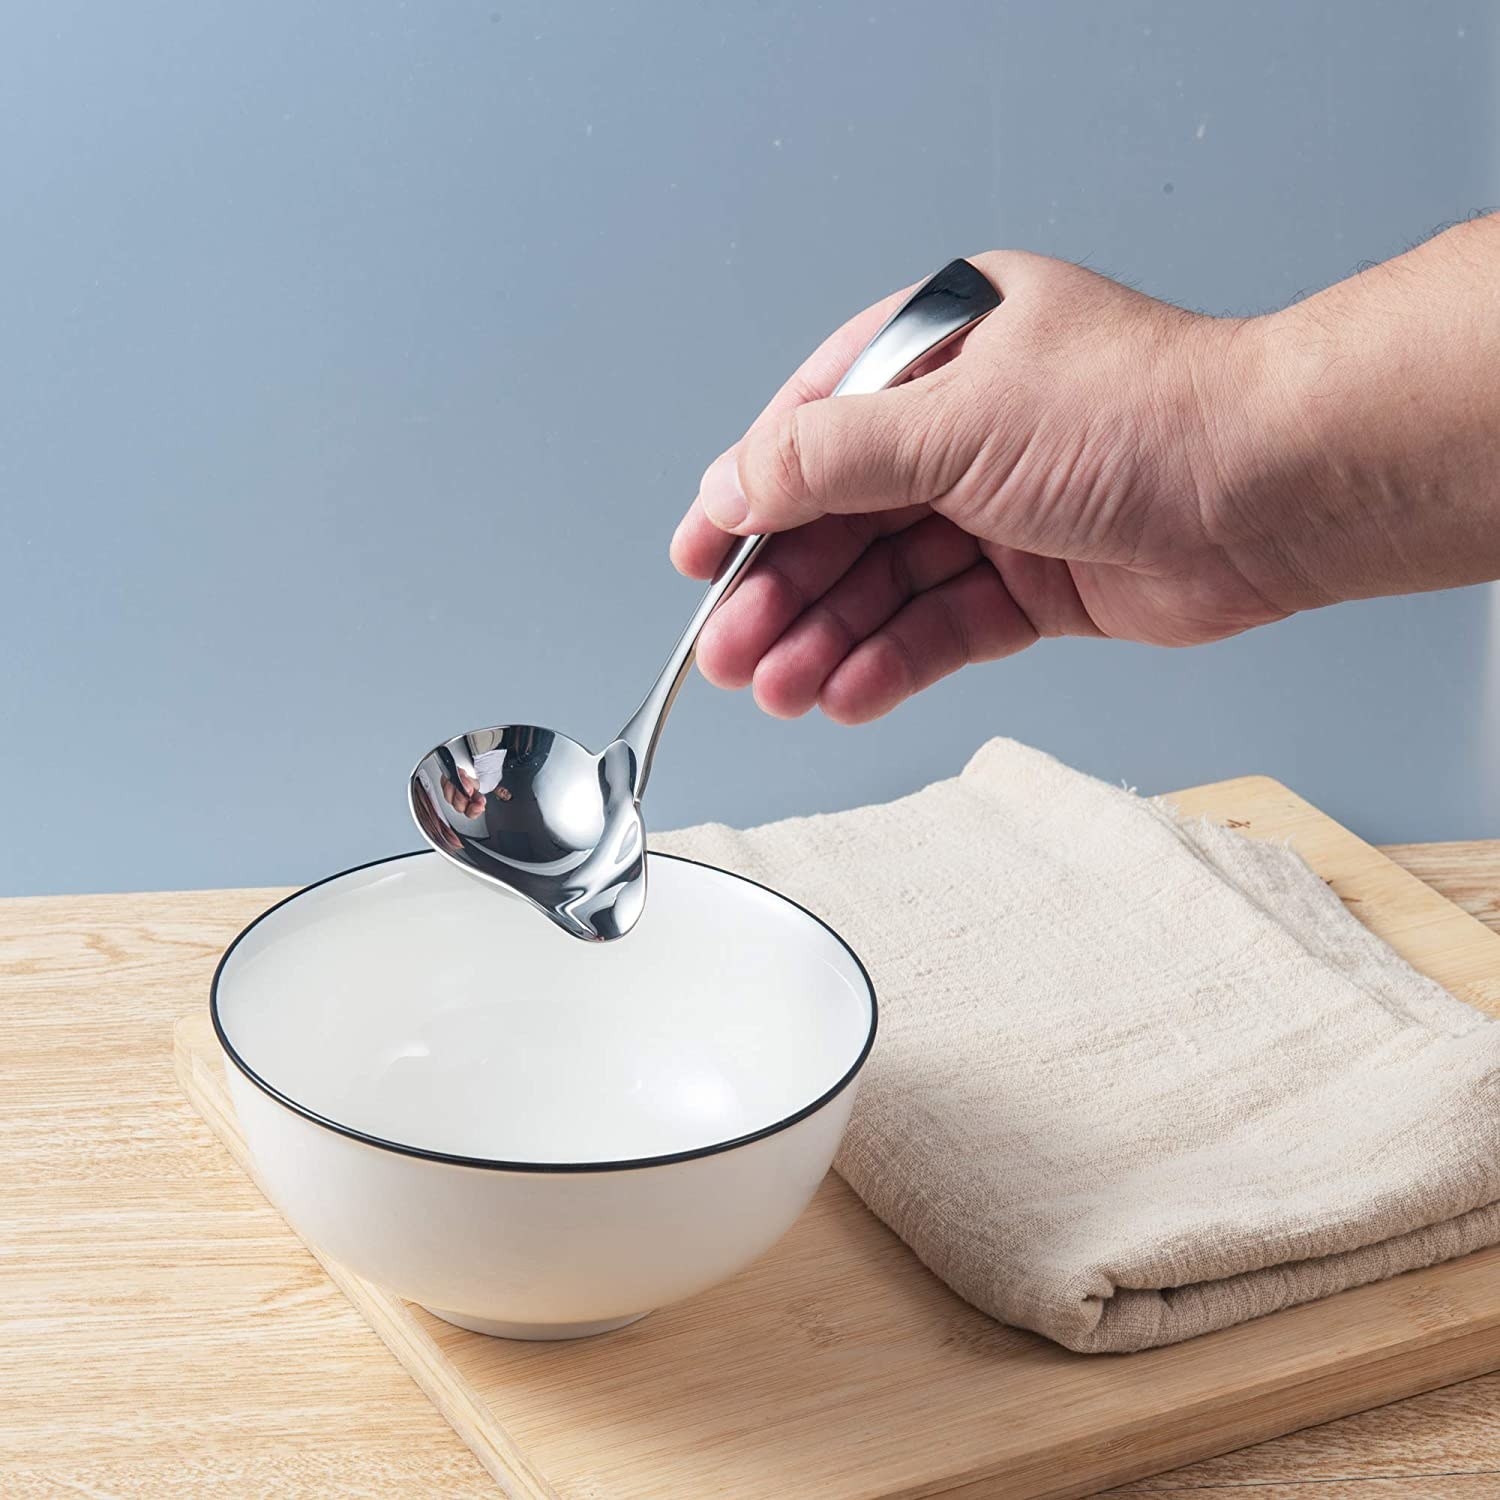 A person holding the spoon over a bowl